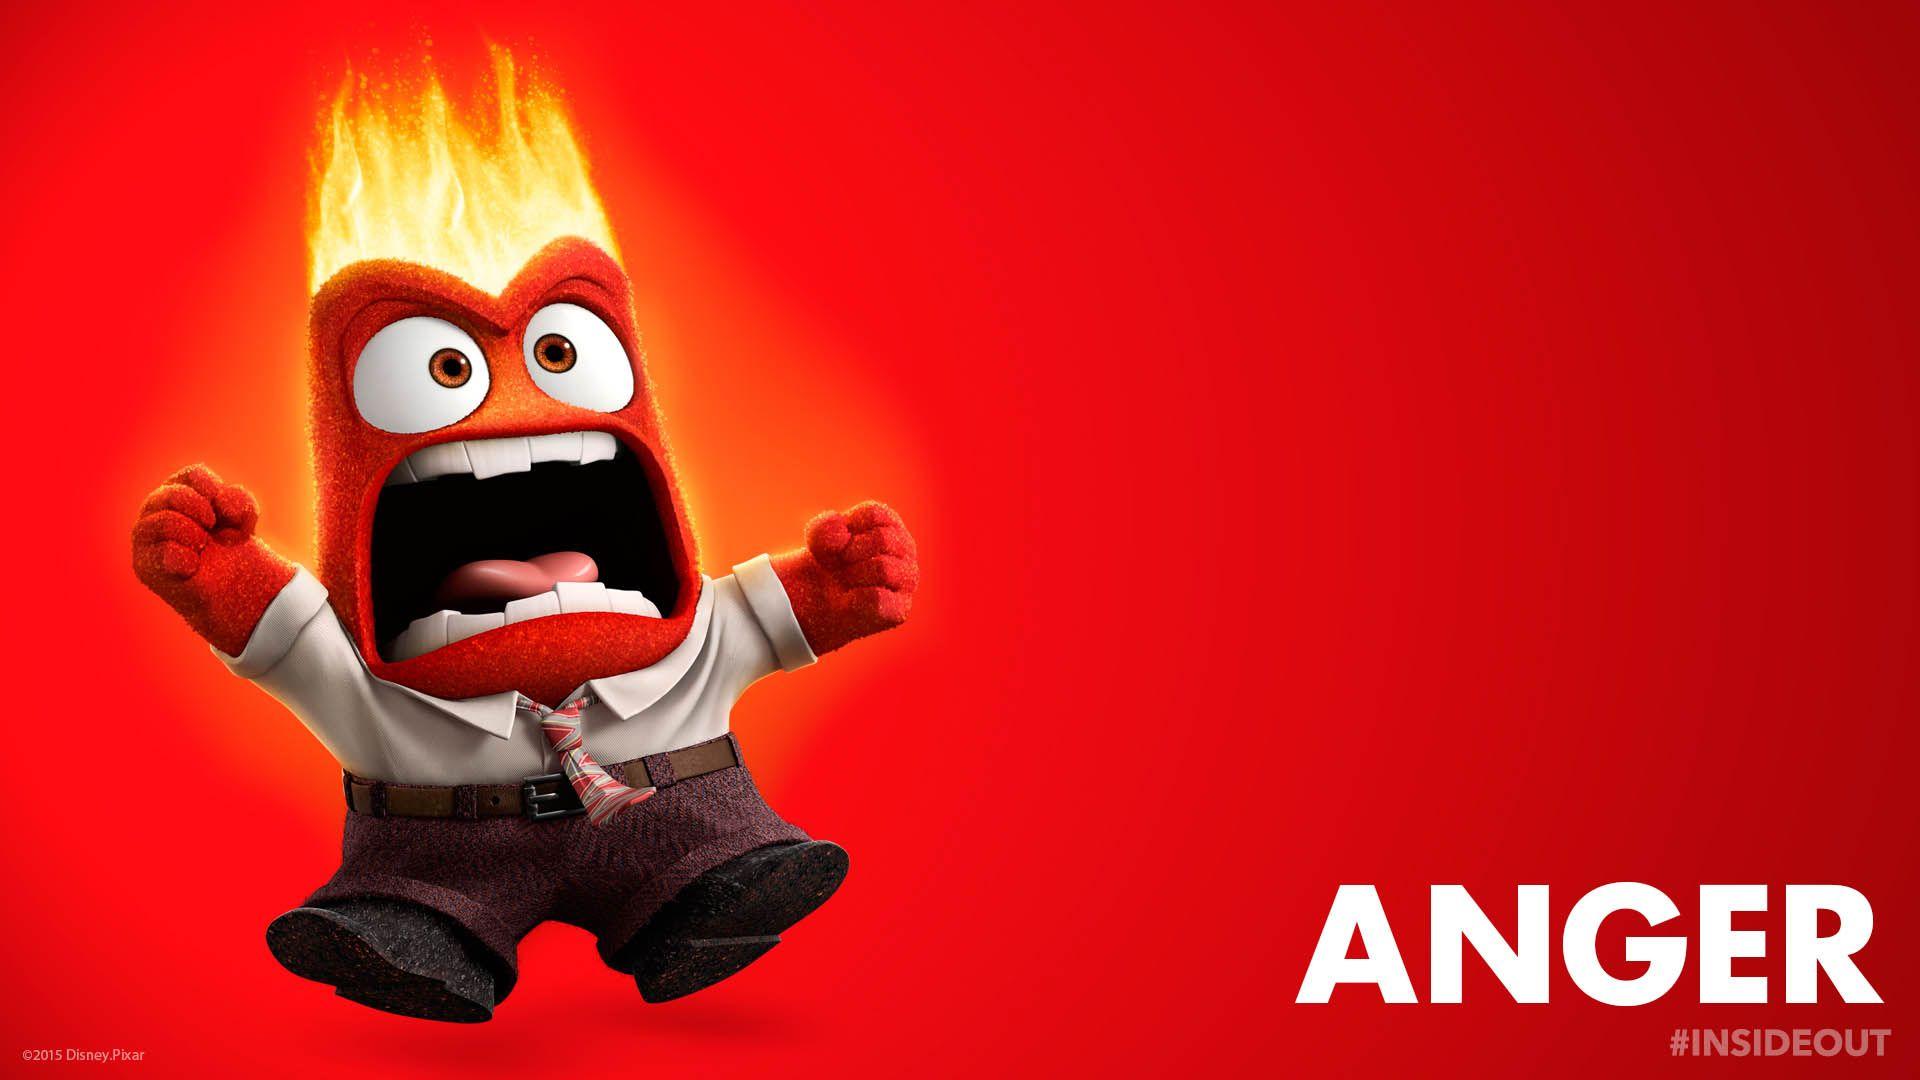 Inside Out character Anger